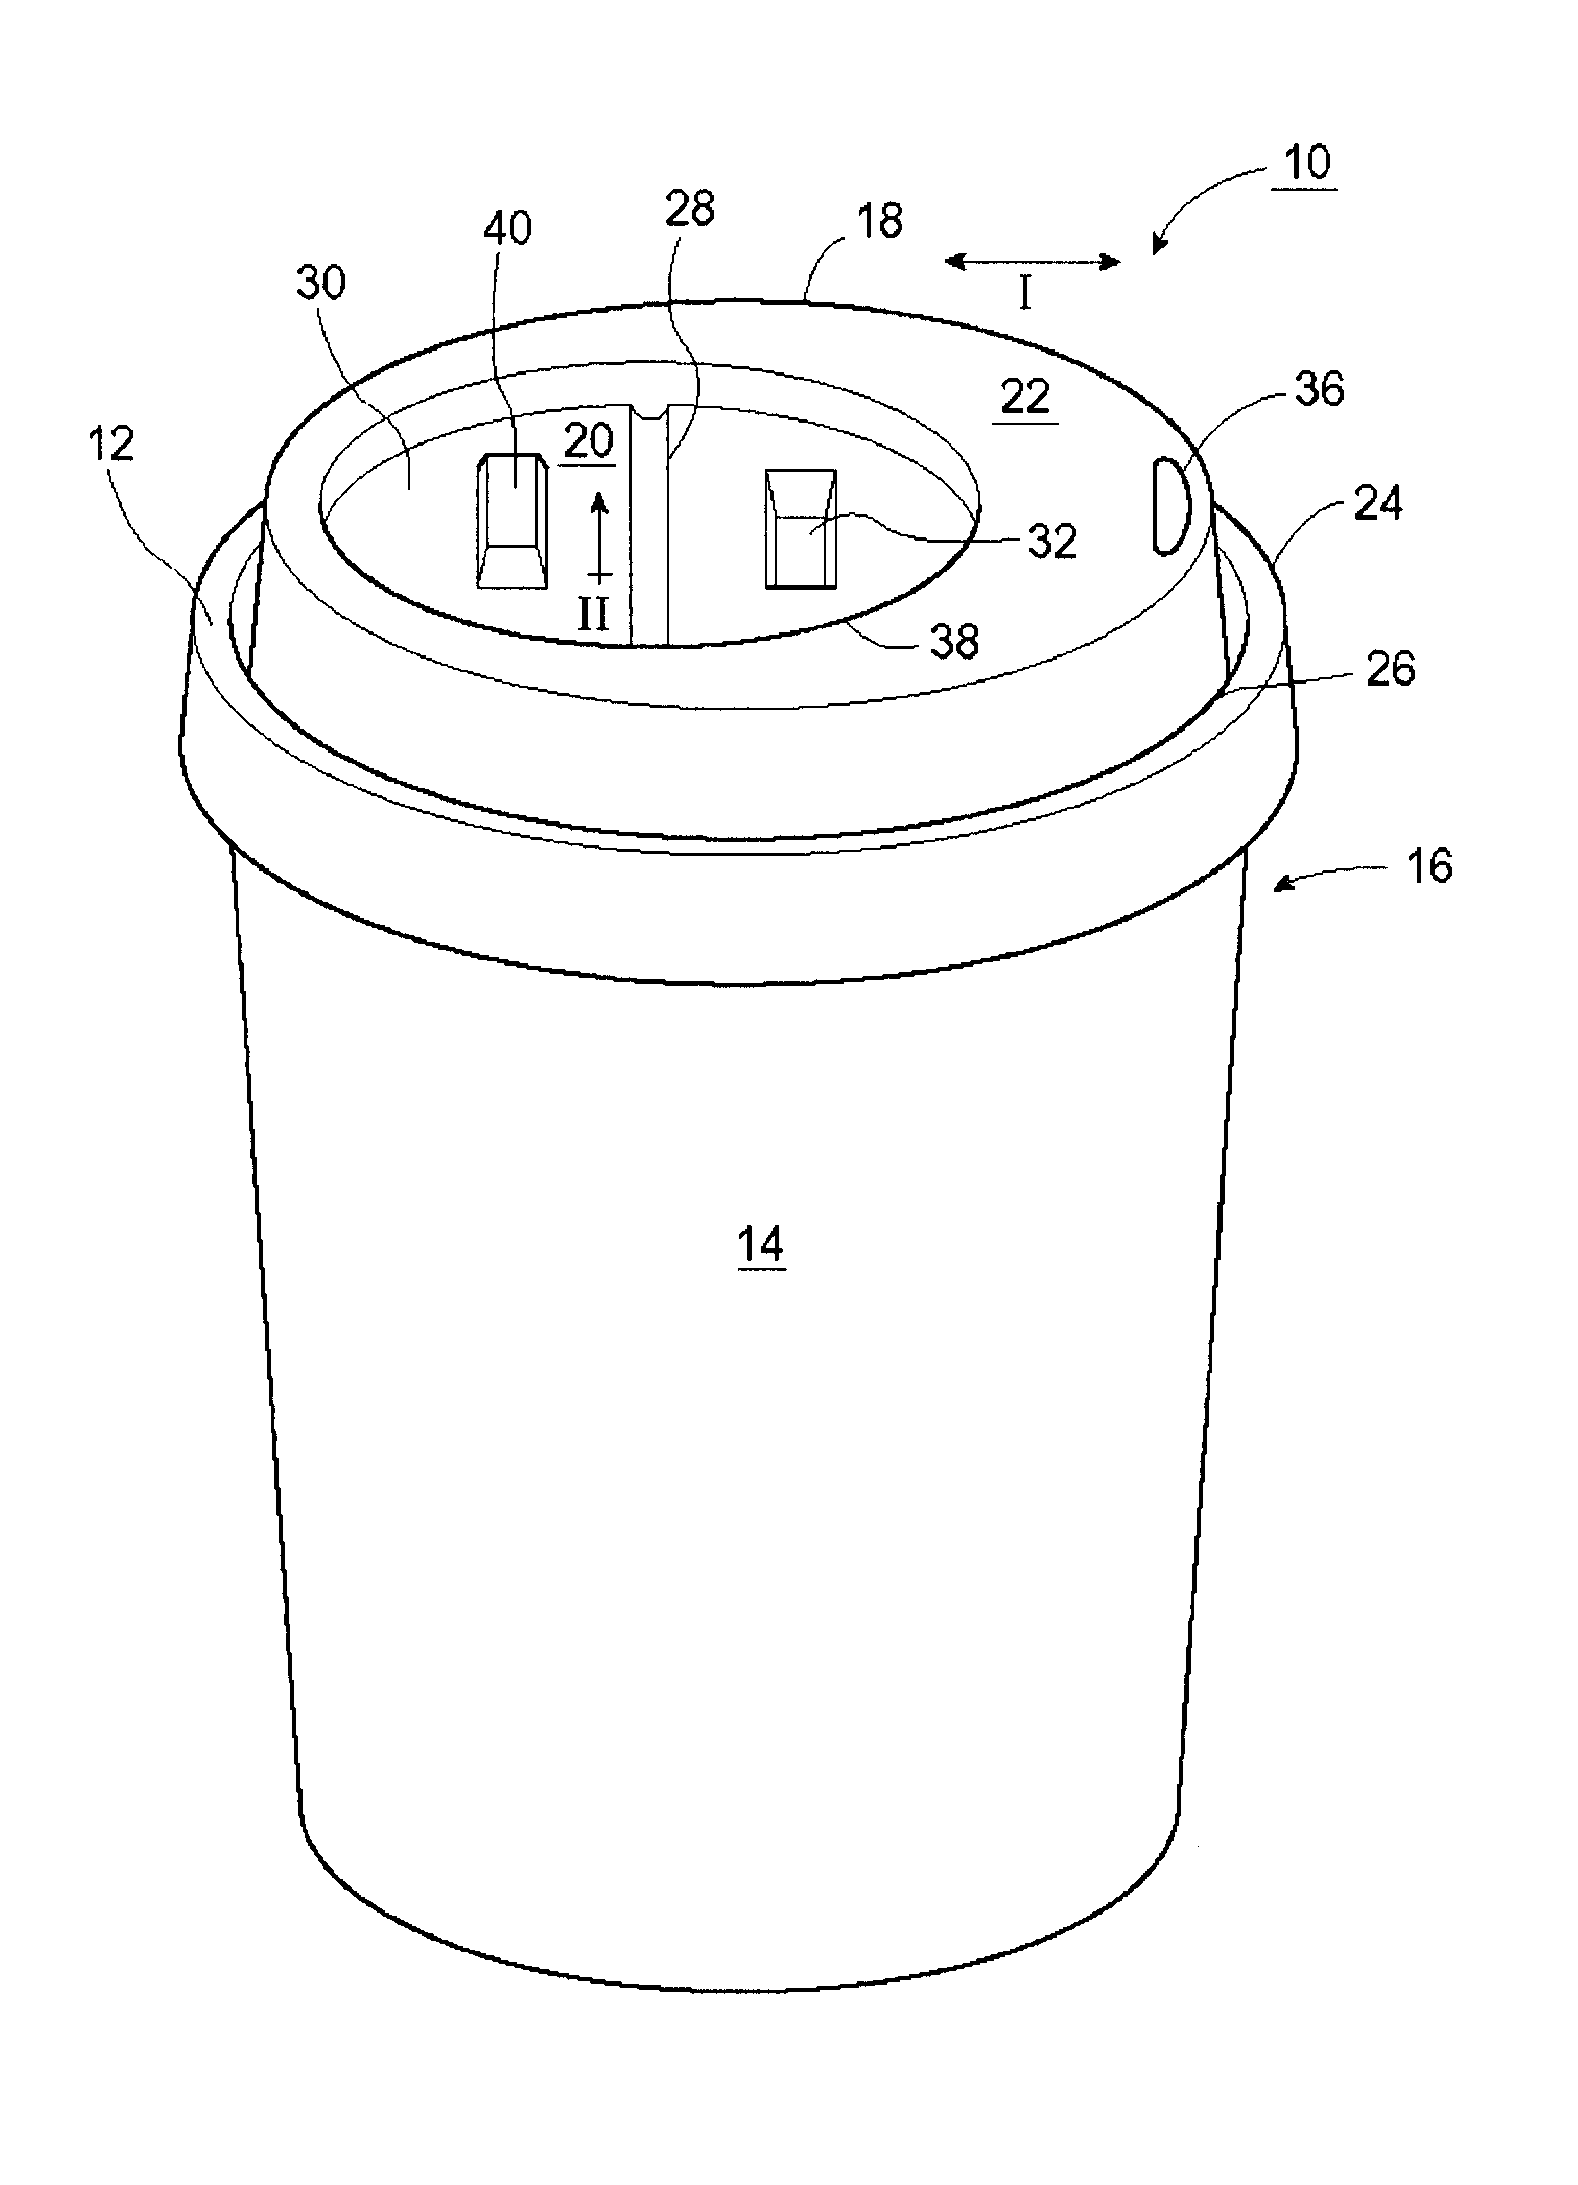 Disposable cup lid with condiment tab